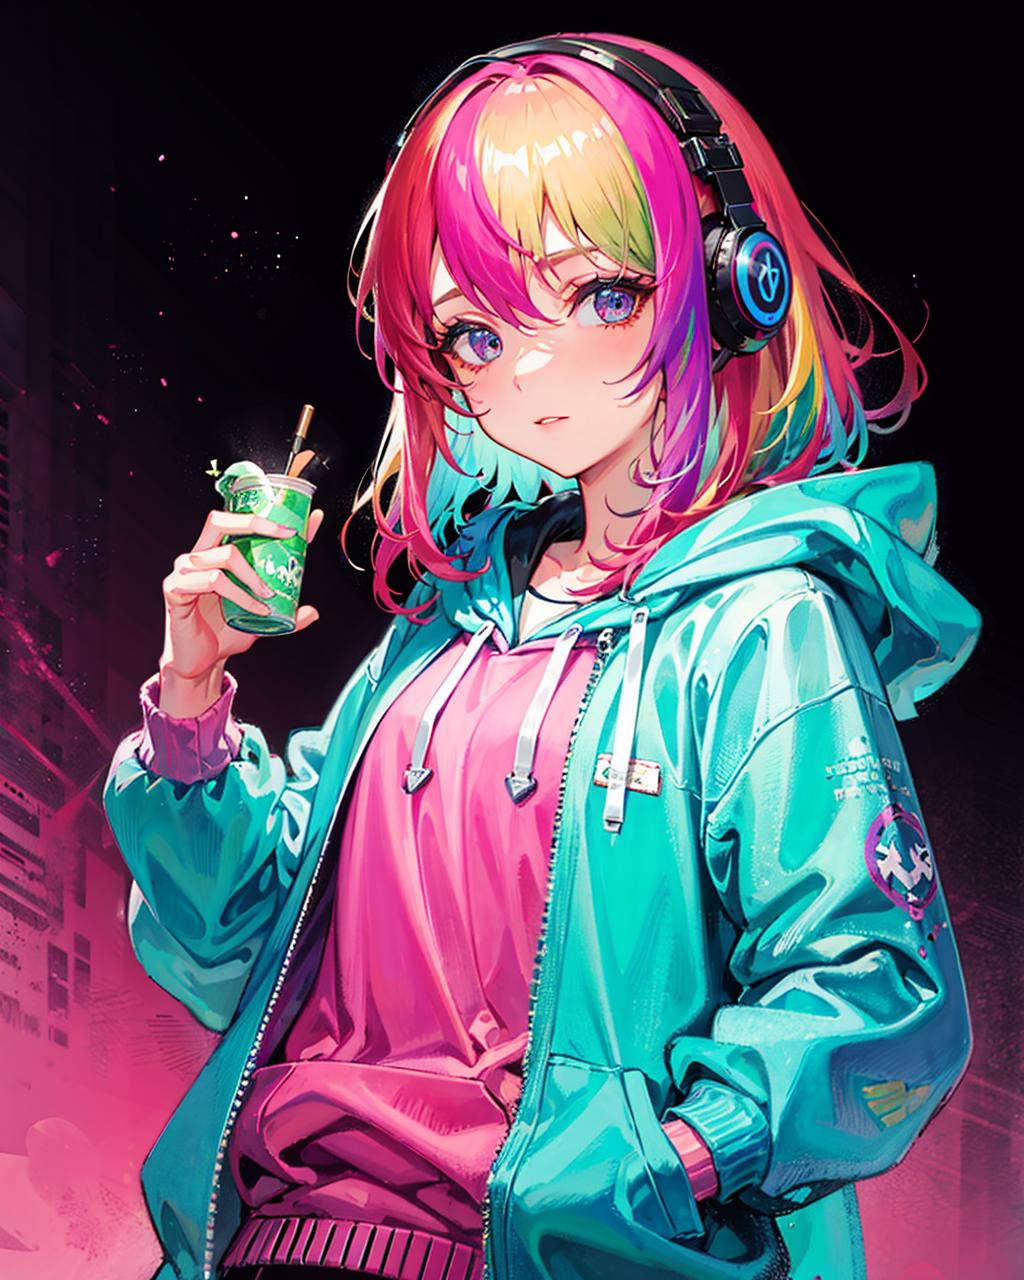 Anime Girl with Rainbow Hair - Profile Pic by Hassyah on DeviantArt